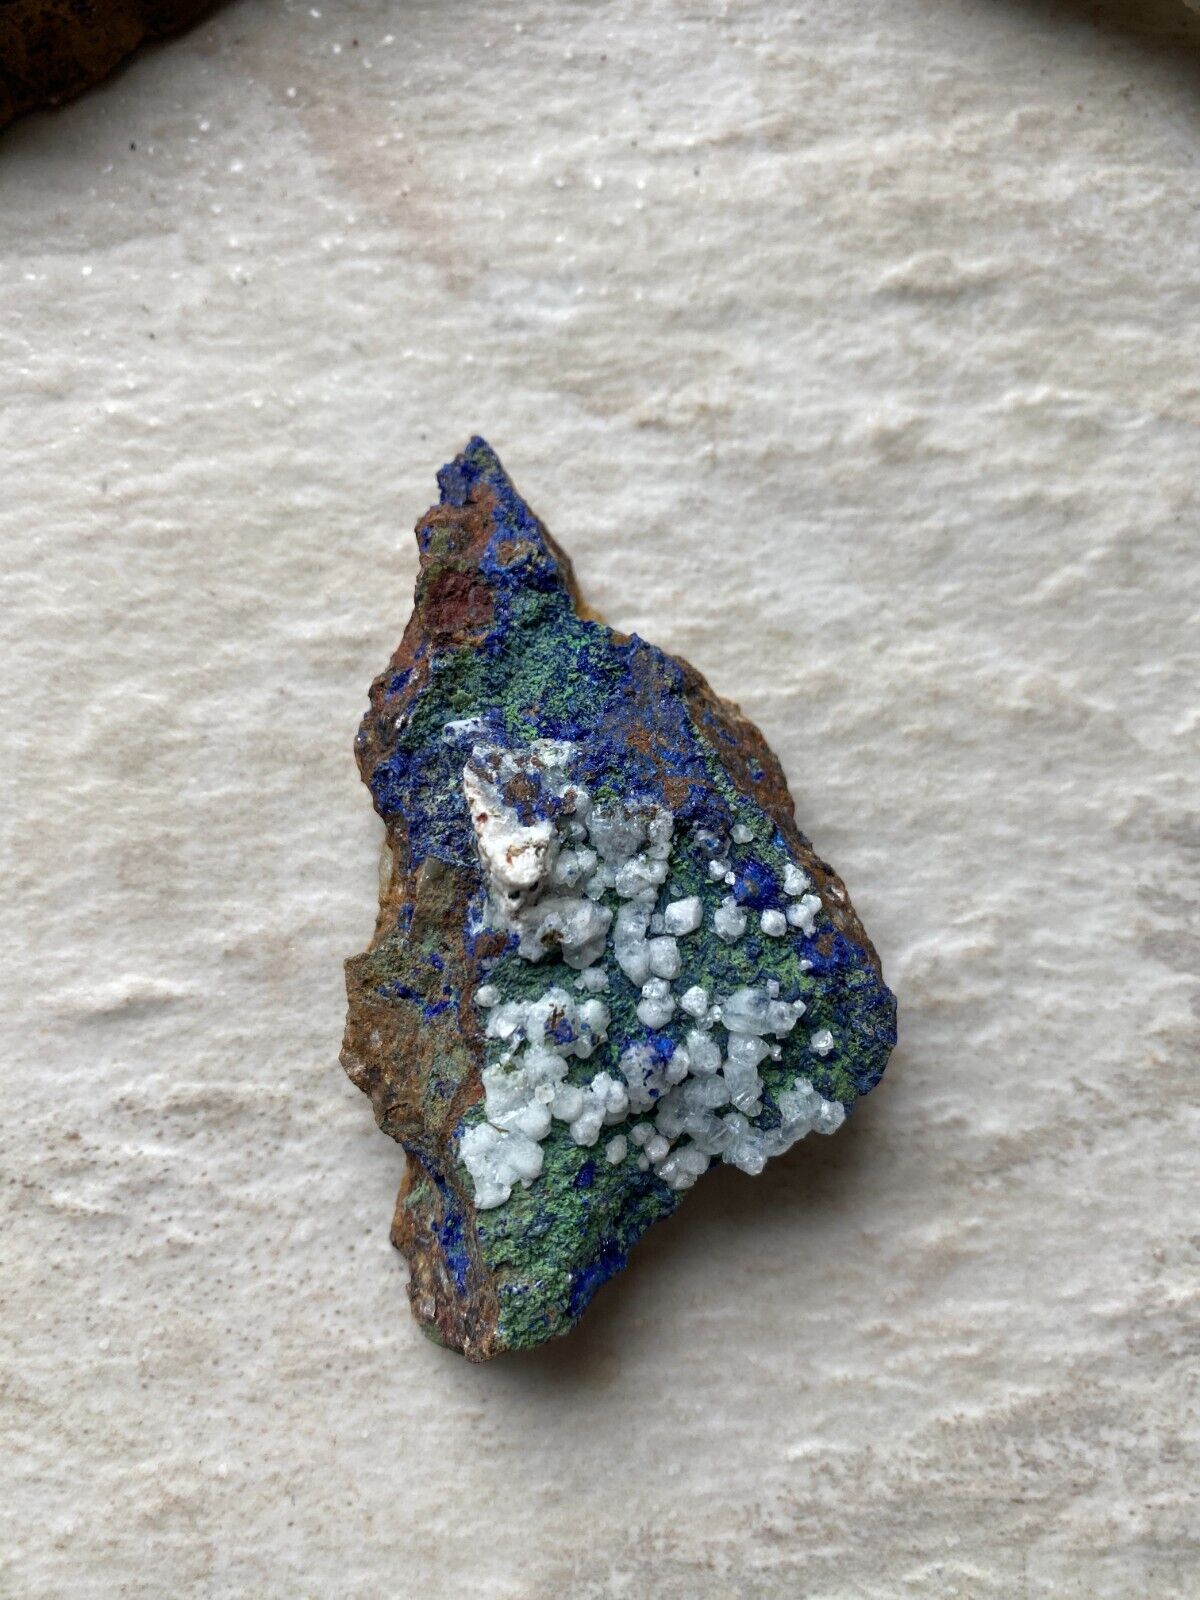 Large Raw Azurite Malachite Mixed Mineral Crystal Specimen - 107 Grams